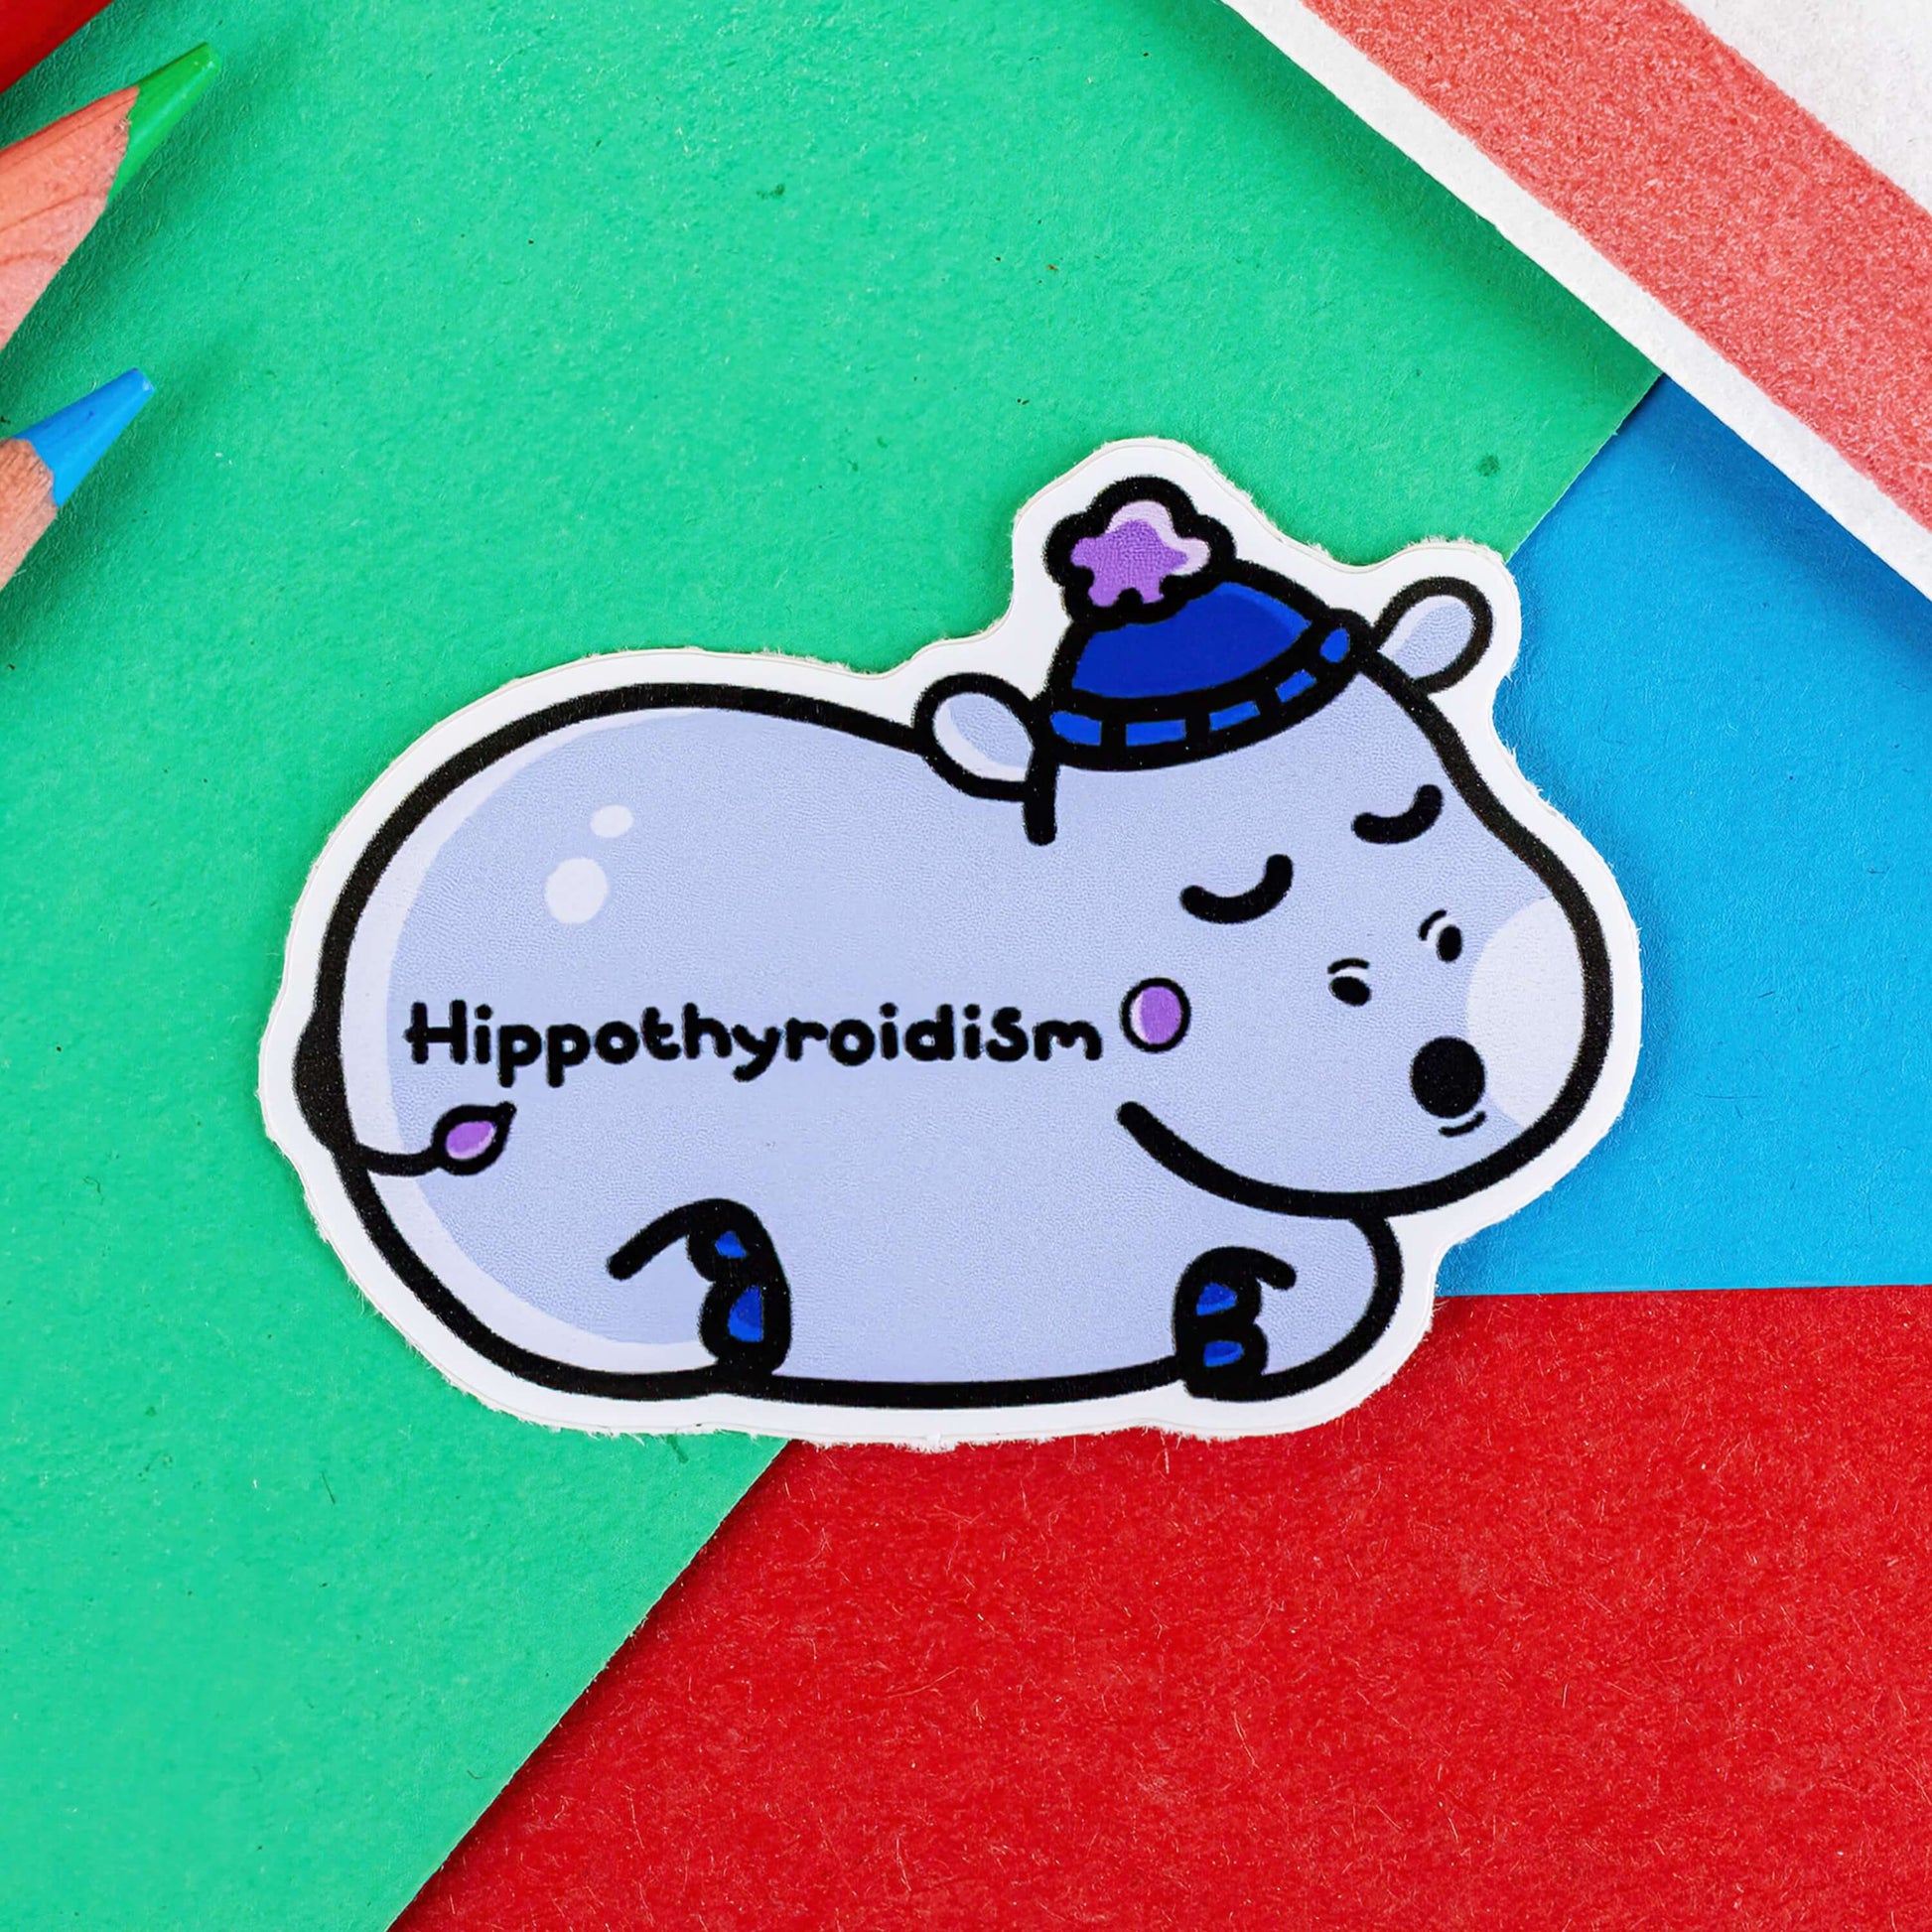 Hippothyroidism Hippo Sticker - Hypothyroidism on a red, blue and green background with colouring pencils and red stripe candy bag. A sleeping pastel blue Hippopotamus wearing a blue bobble hat shape sticker with black text across its body reading 'hippothyroidism'.  The hand drawn design is raising awareness for hypothyroidism.